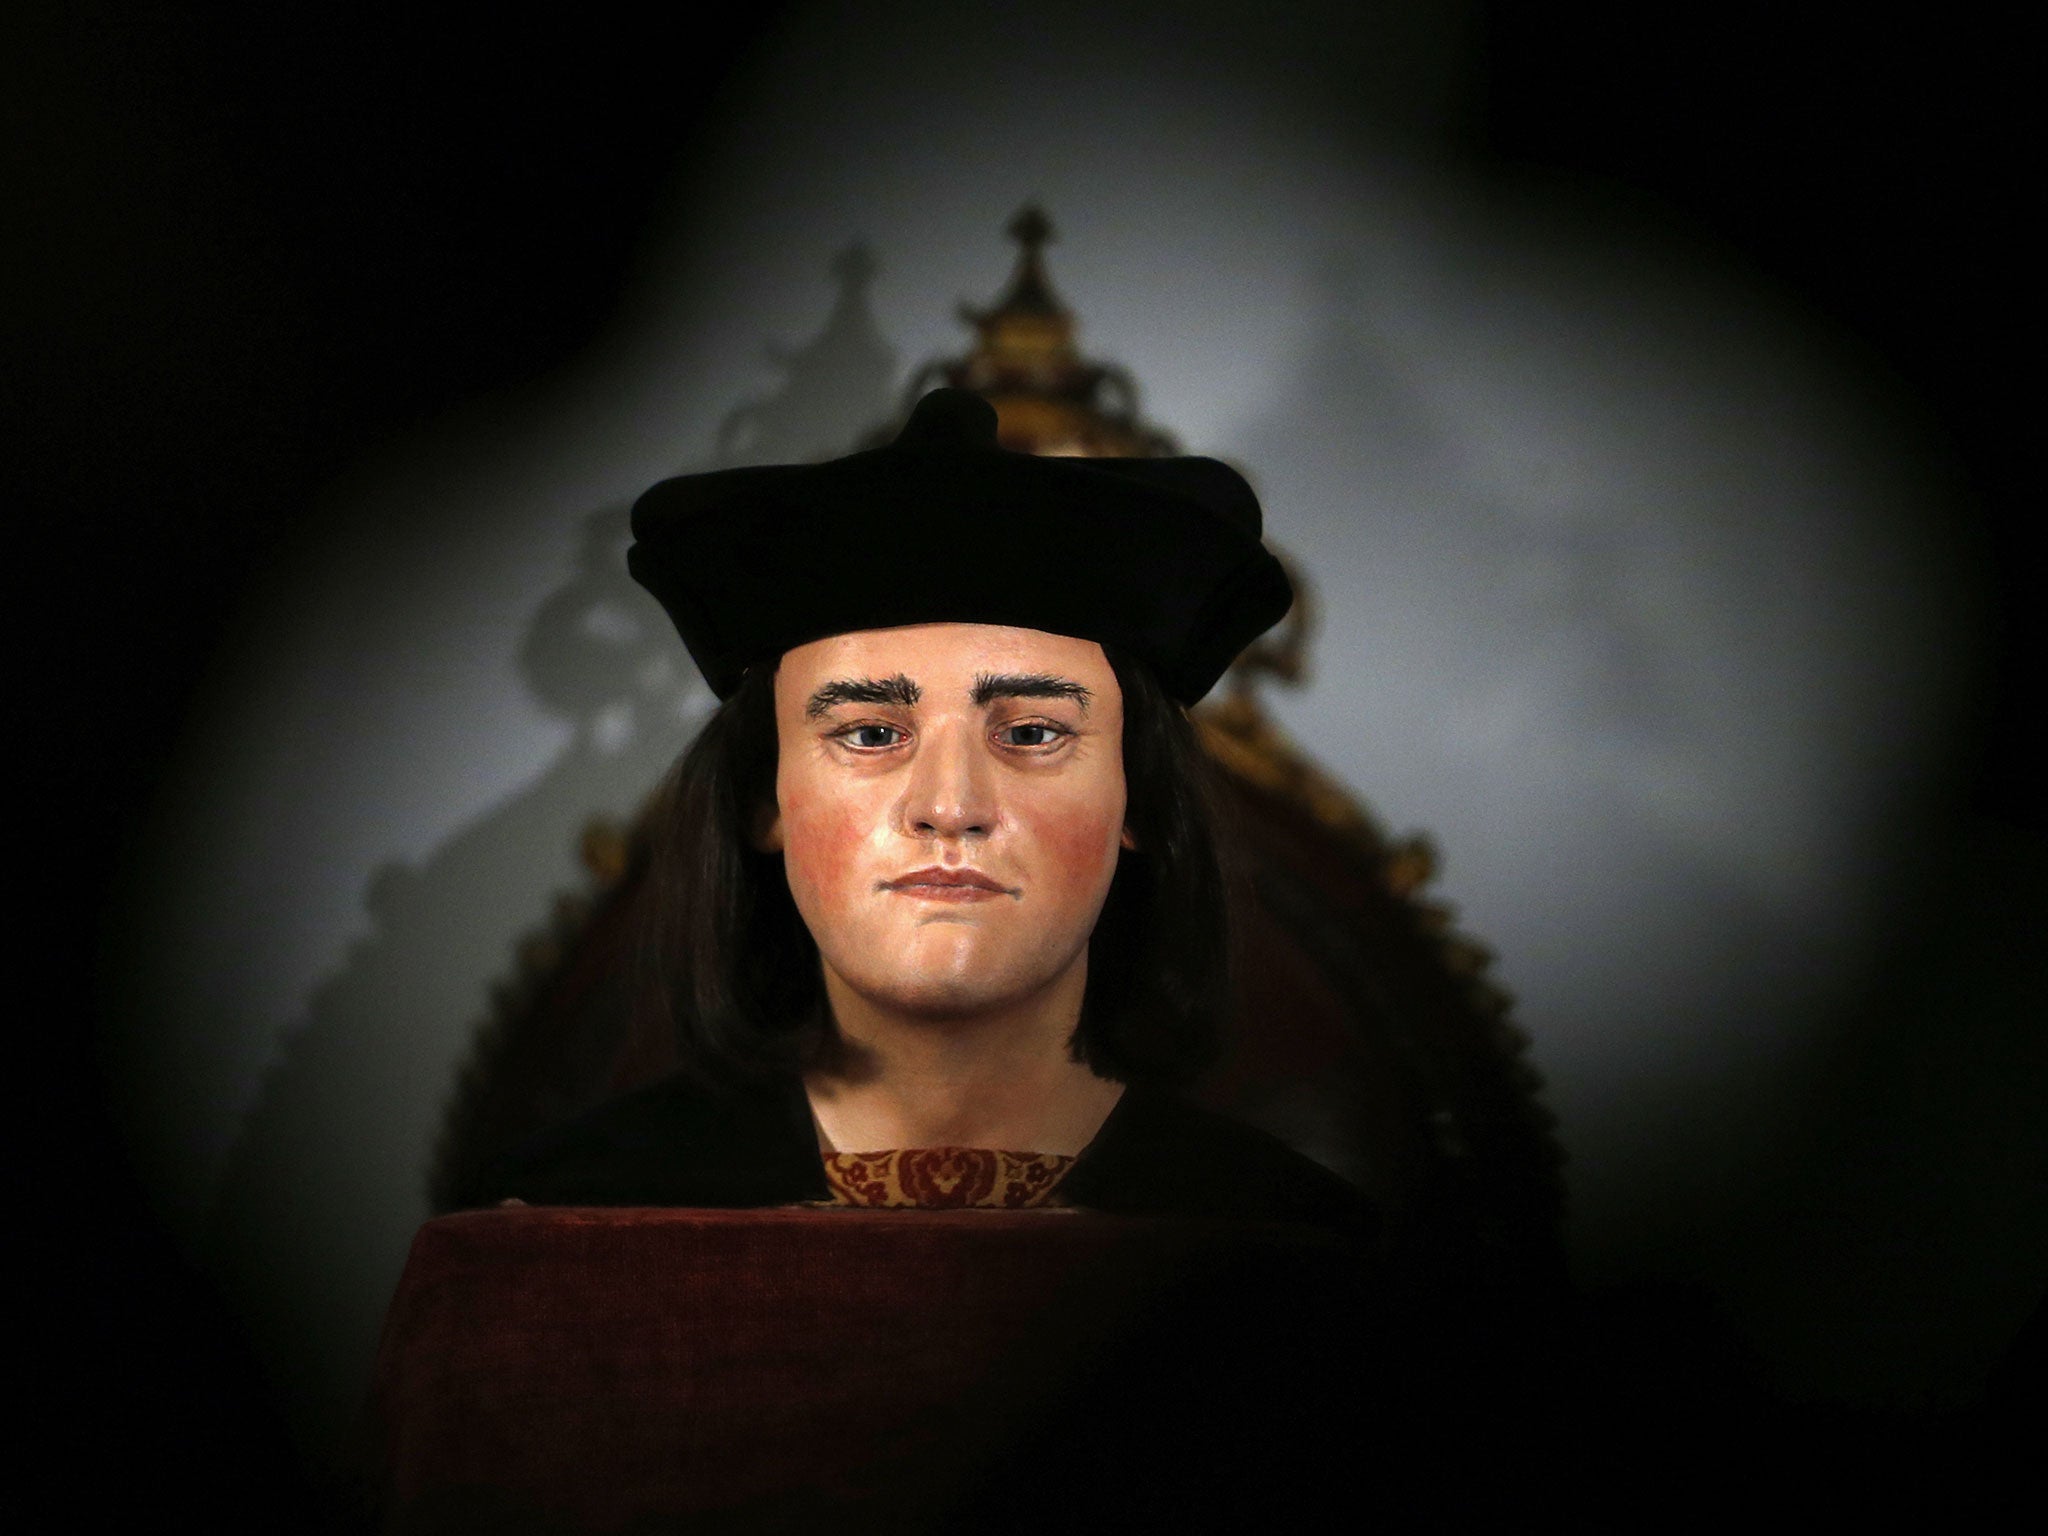 February 5, 2013: A facial reconstruction of King Richard III is displayed at a news conference in central London. The reconstruction is based on a CT scan of human remains found in a council car park in Leicester which are believed to belong to the last